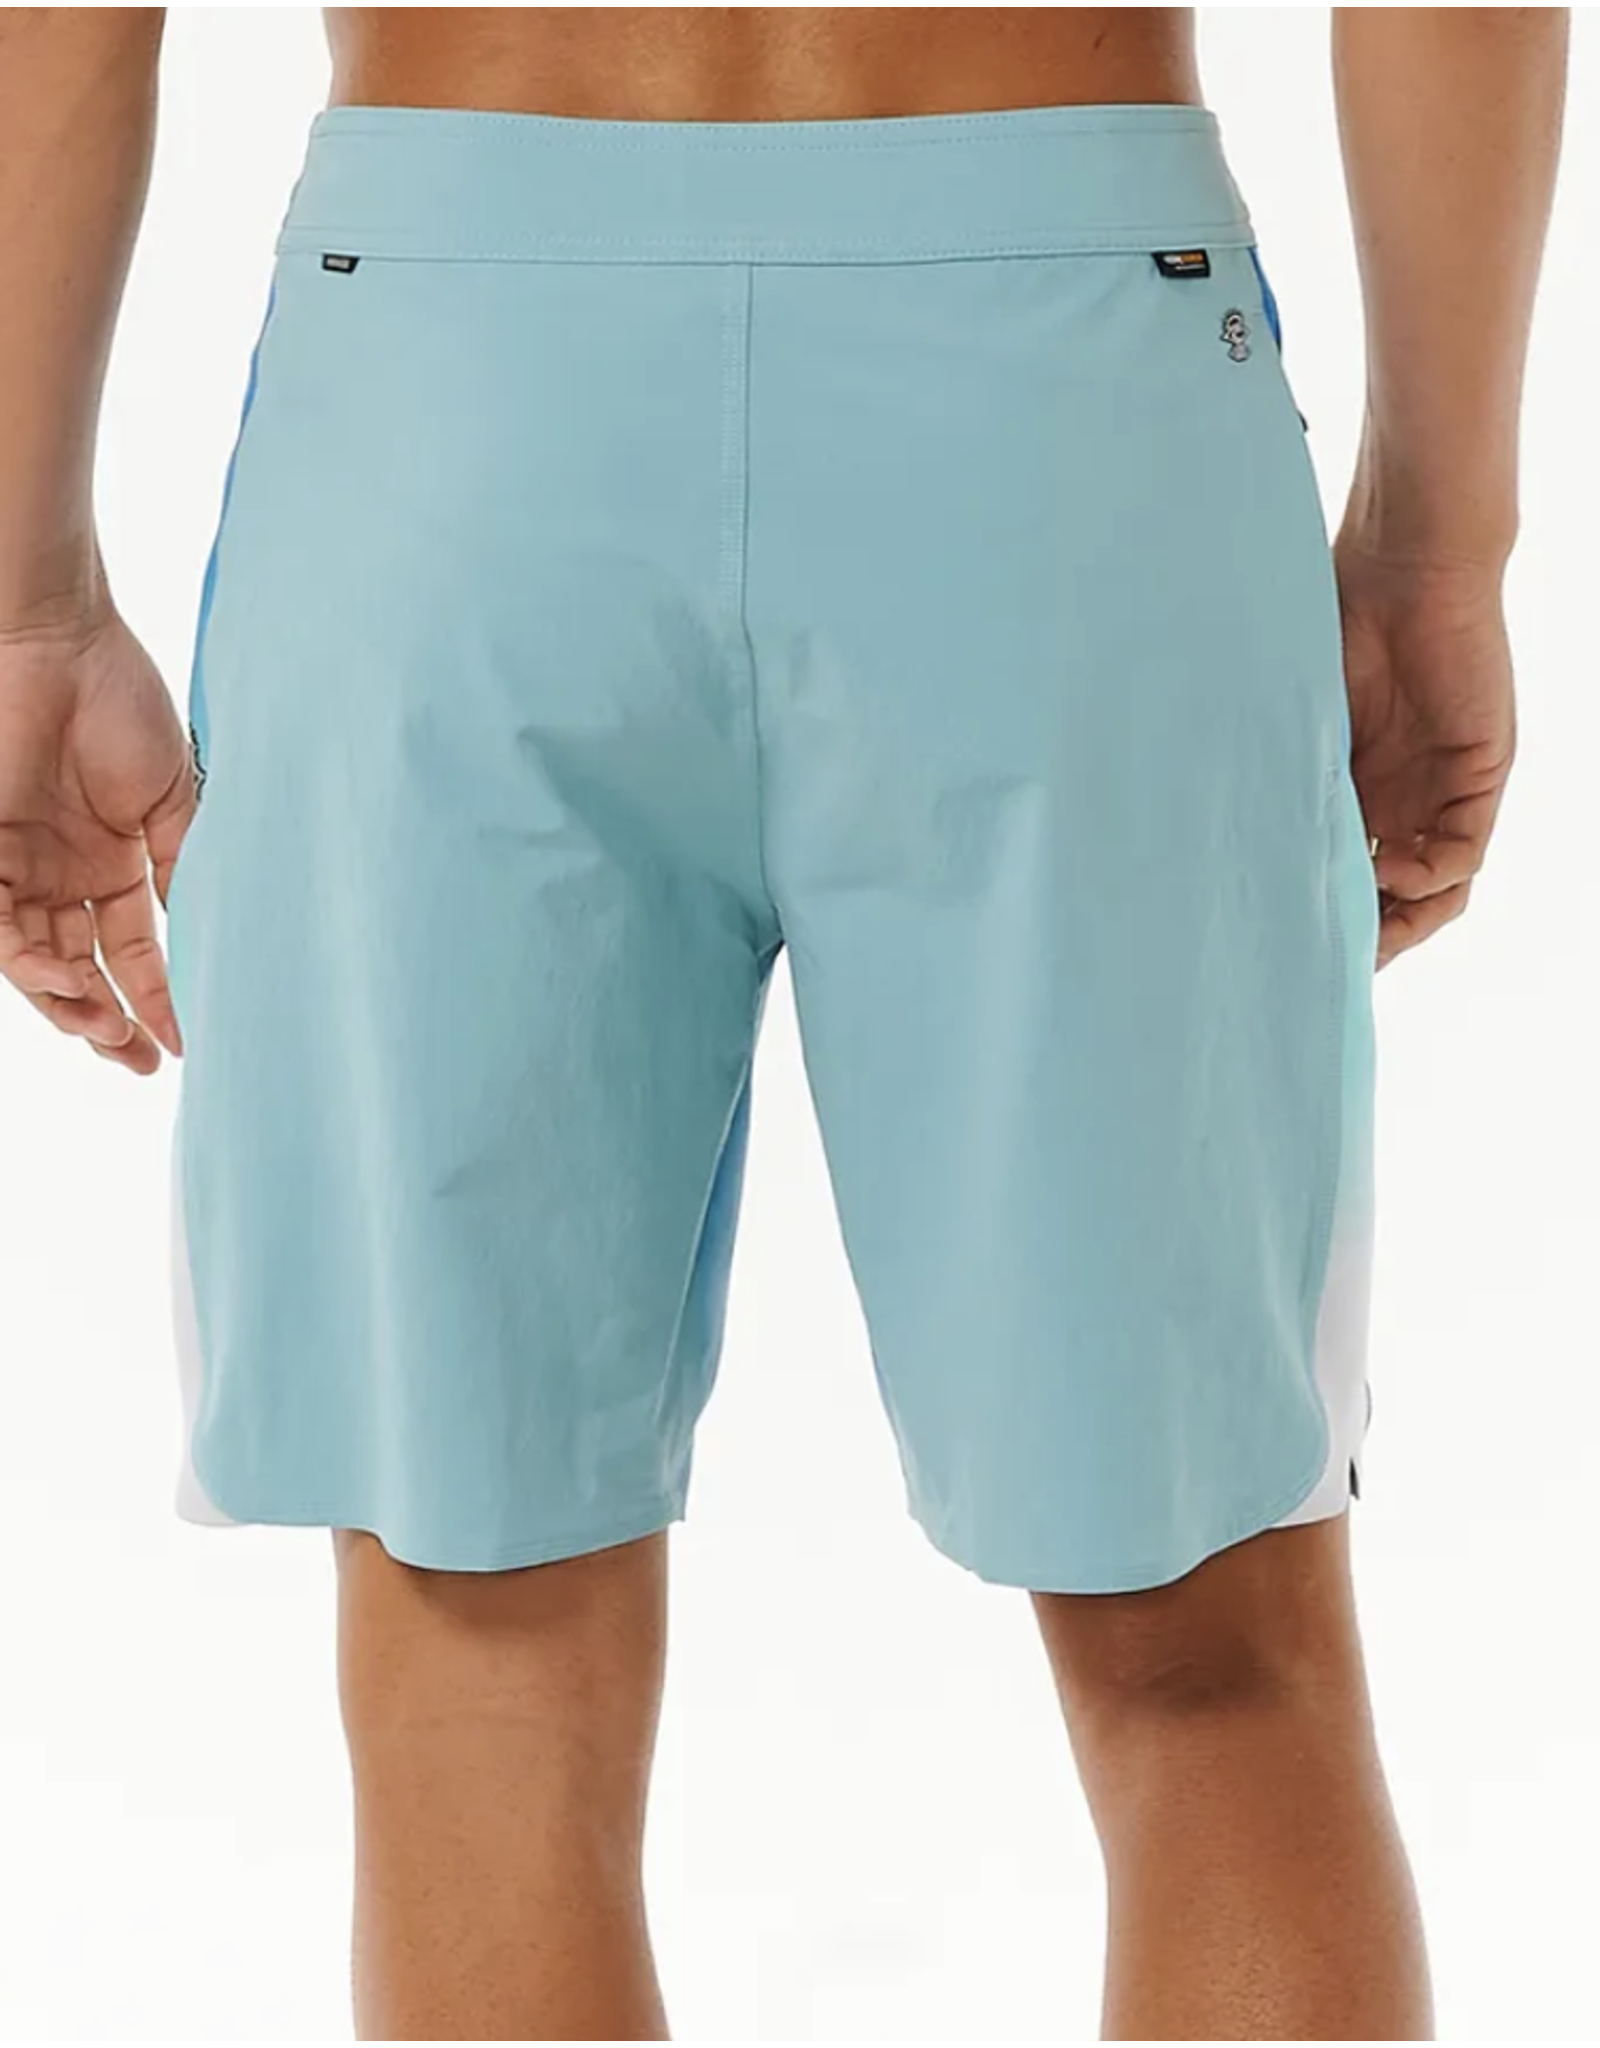 Rip Curl Rip Curl Mirage 3-2-One Ultimate Boardshorts Light Blue